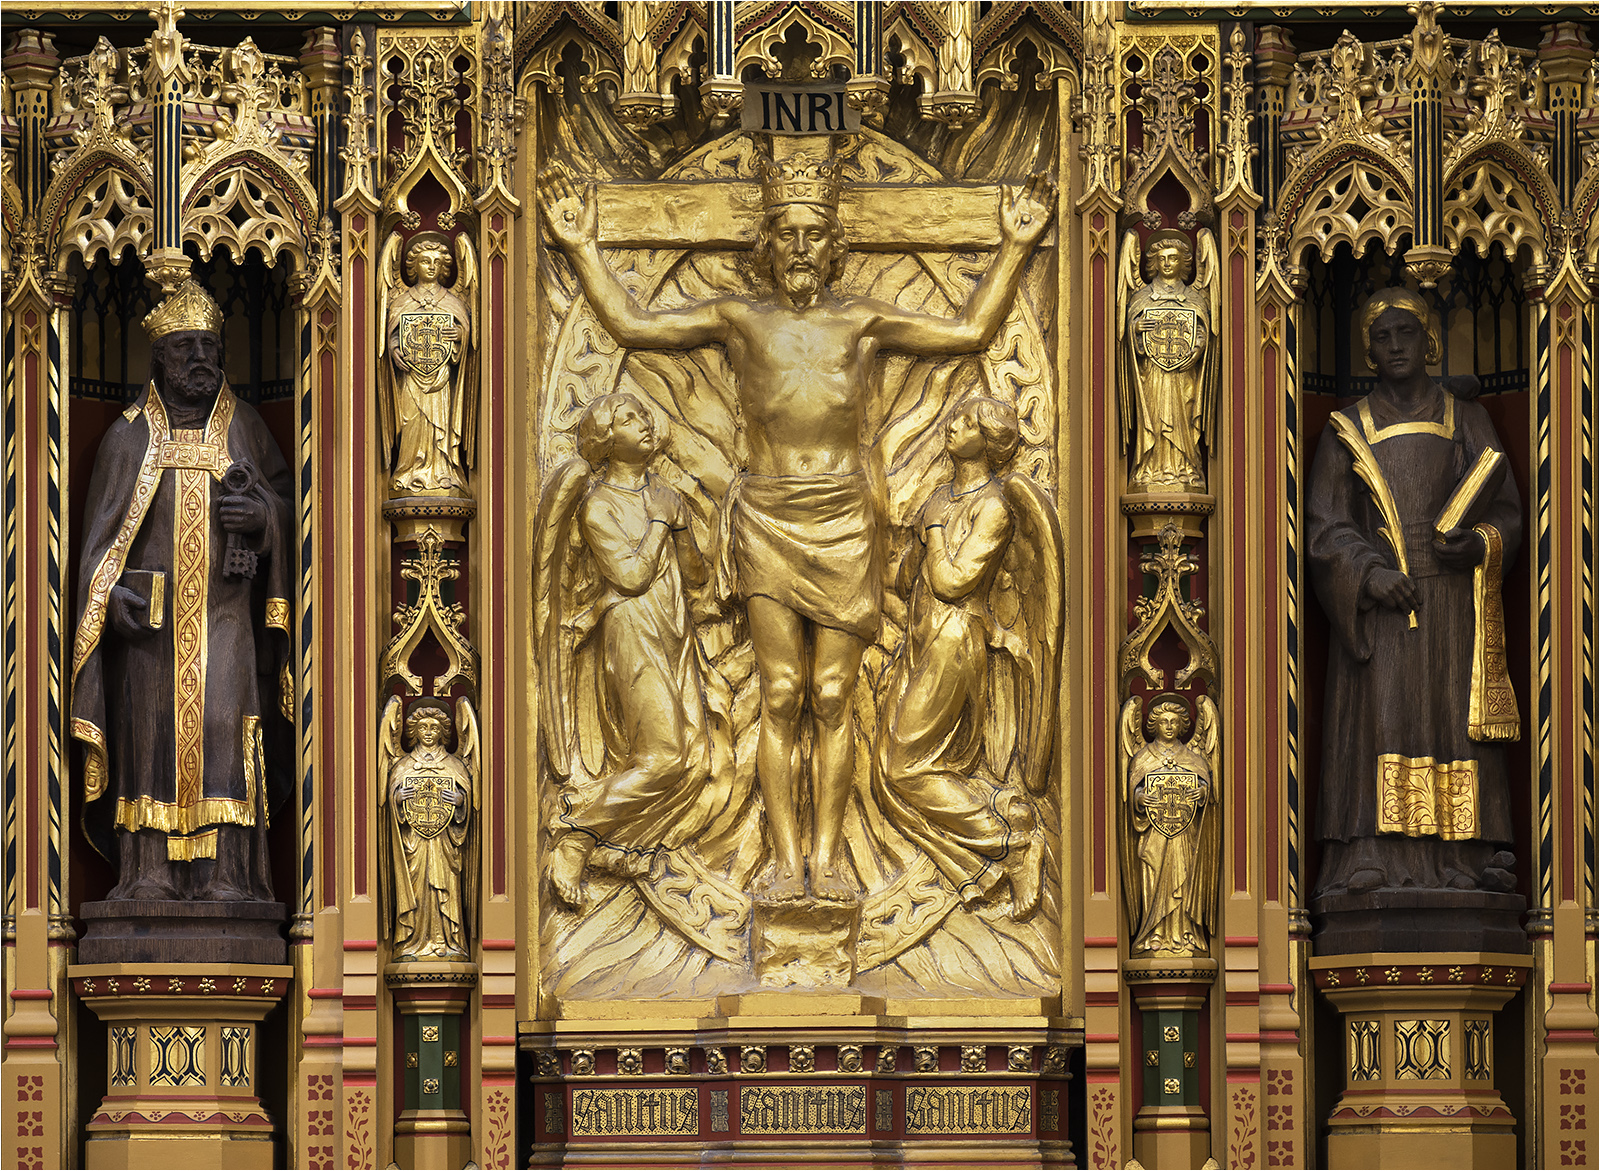 DETAIL OF SAILORS CHAPEL REREDOS IN CHICHESTER CATHEDRAL